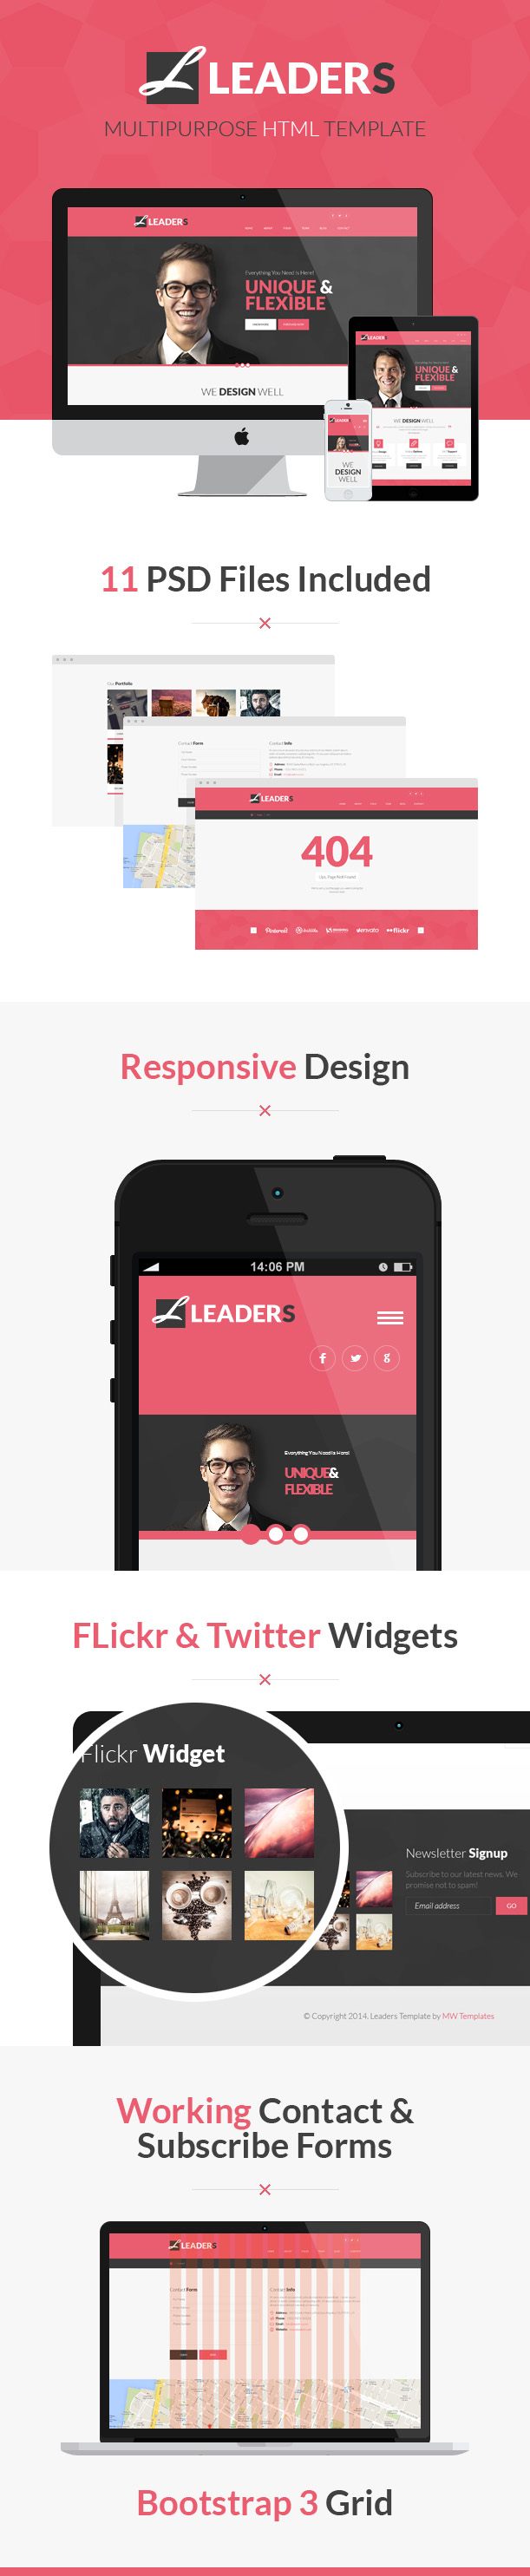 Leaders - bootstrap HTML template